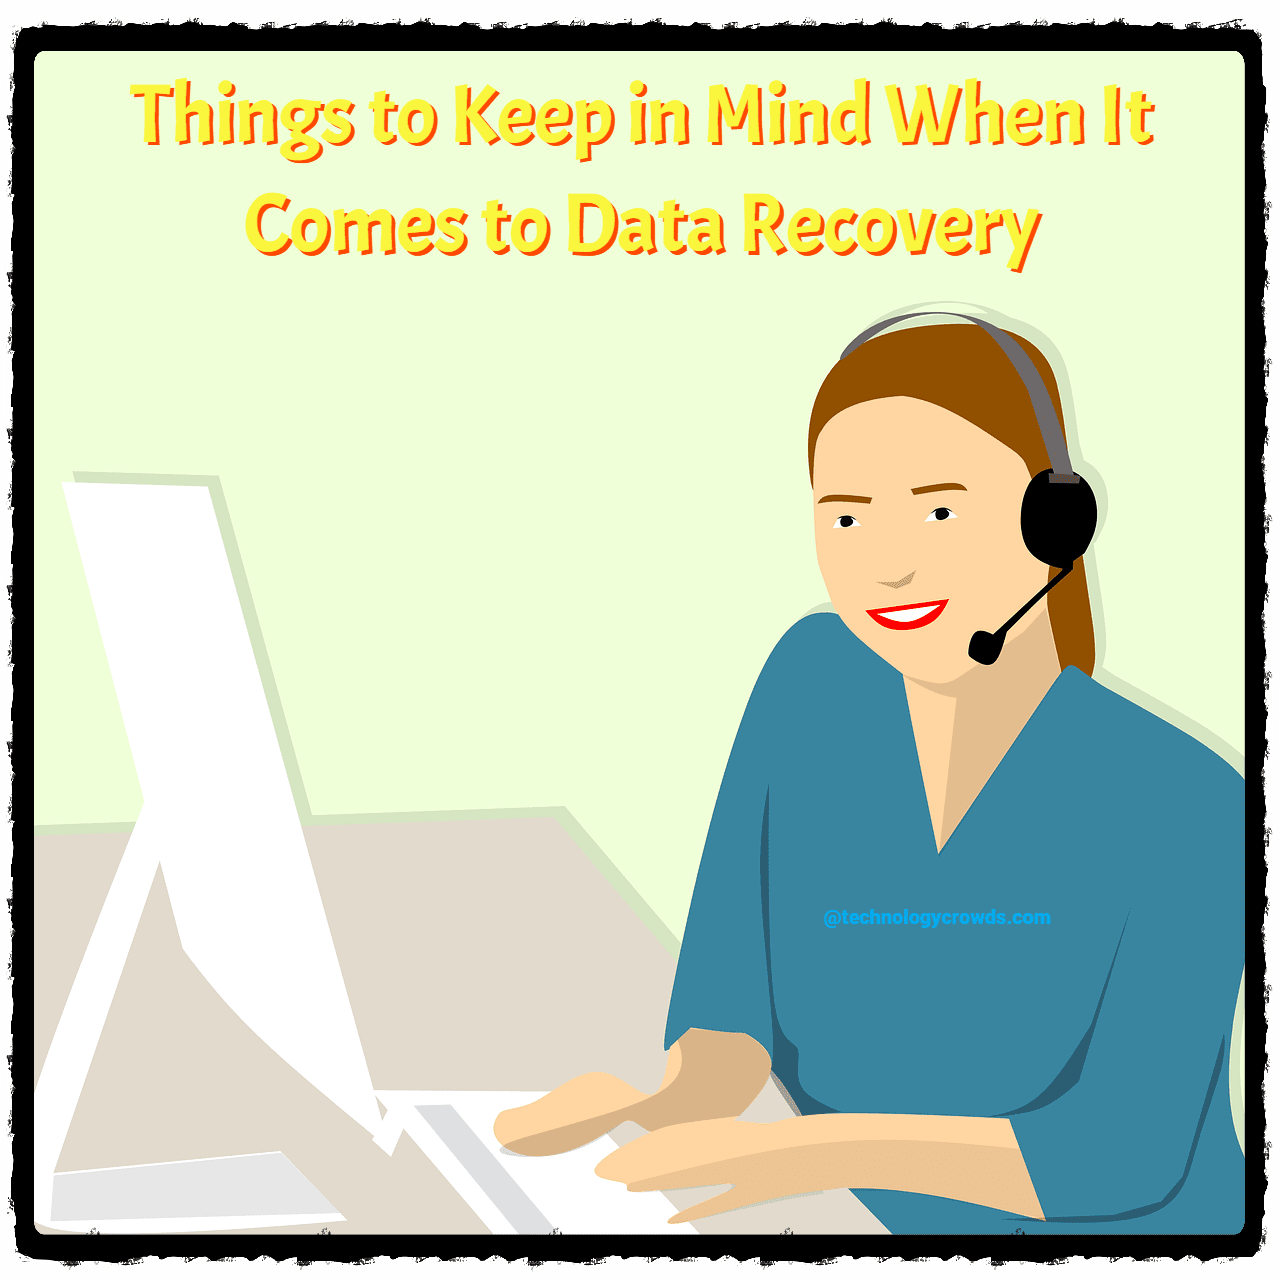 Things to Keep in Mind When It Comes to Data Recovery